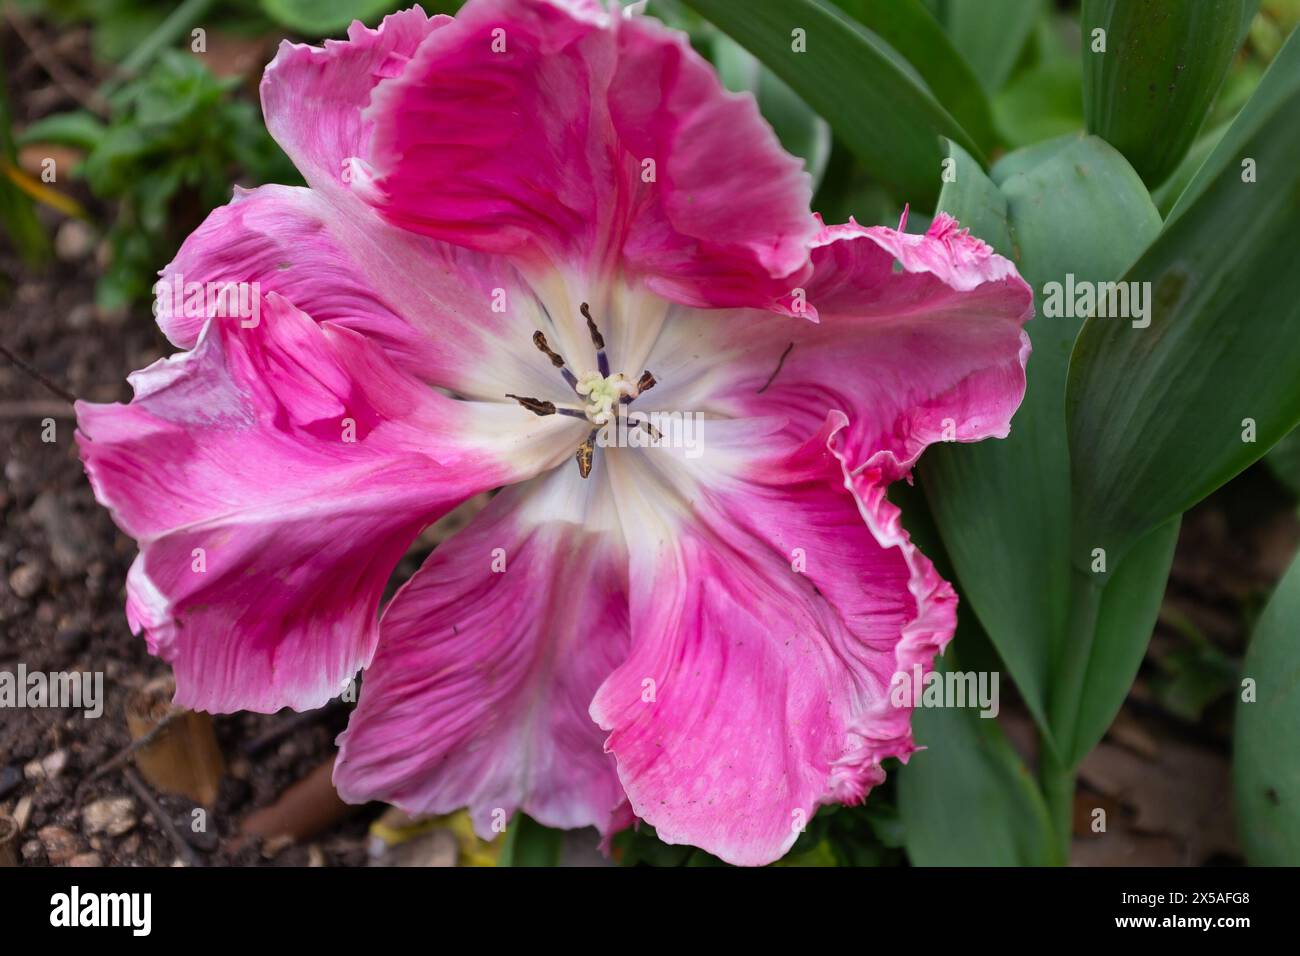 Top view of the curly and ruffled petals of a bright pink and white parrot tulip (Tulipa gesneriana) Stock Photo